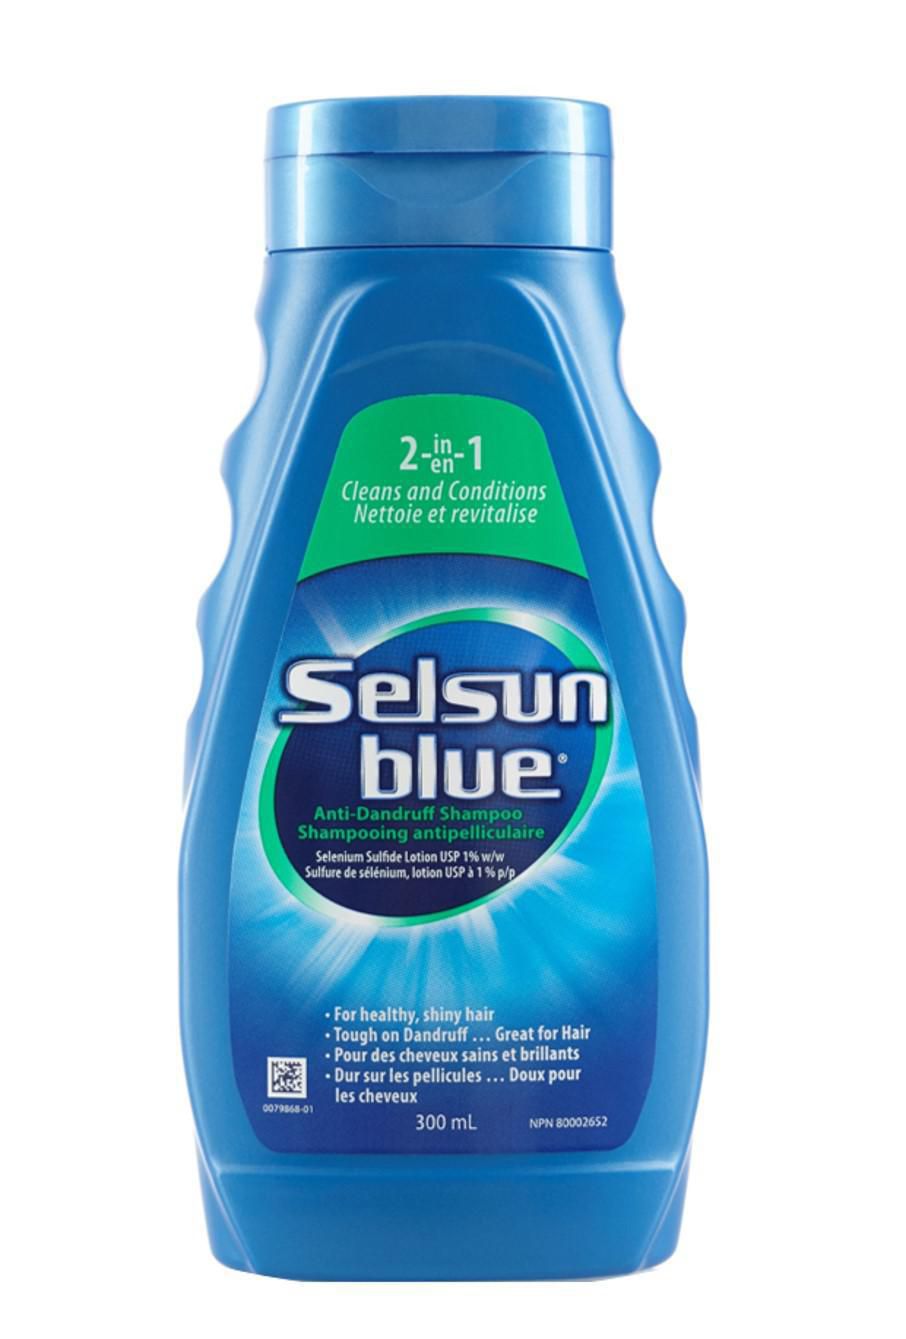 Selsun Blue 2-In-1 Shampoo, 300 mL, Helps Control Dandruff, Itching and Flaking, Cleans & Conditions in One Step Application Walmart Canada